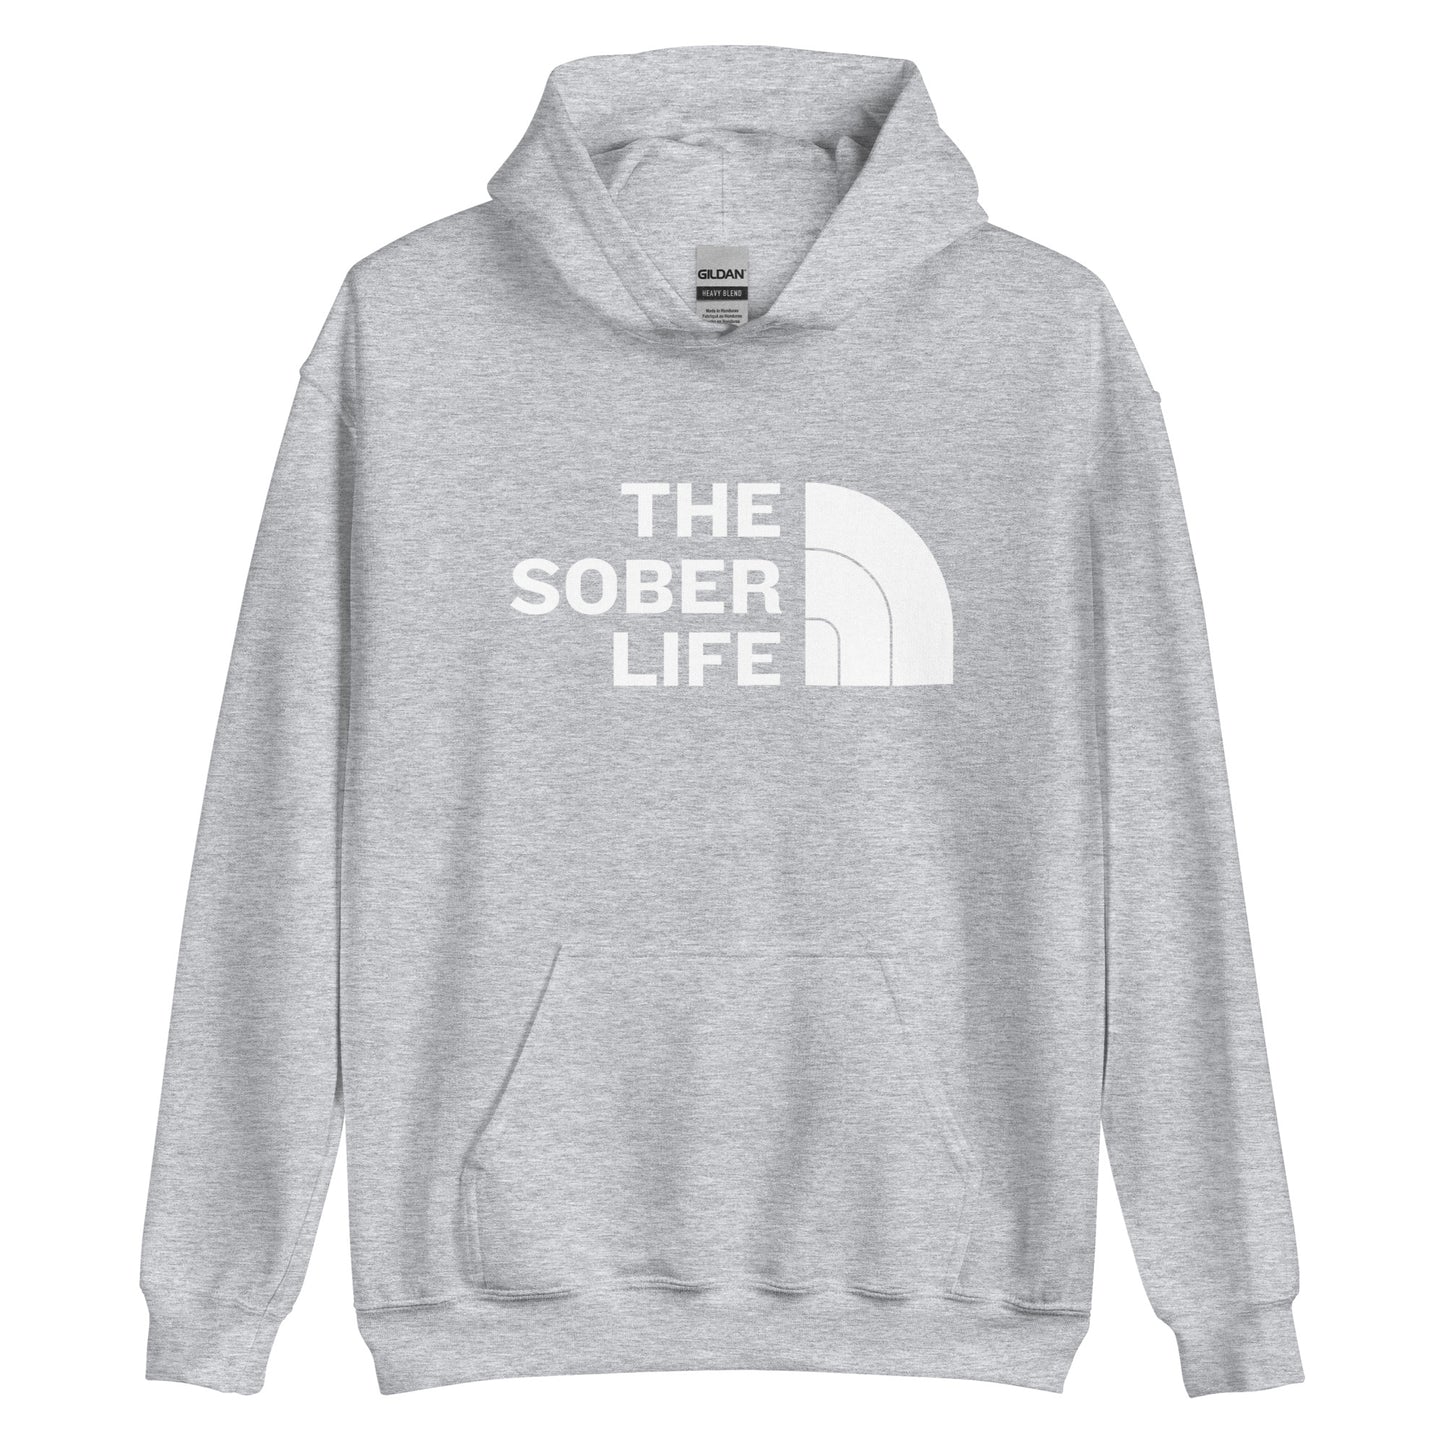 The Sober Life Hoodie